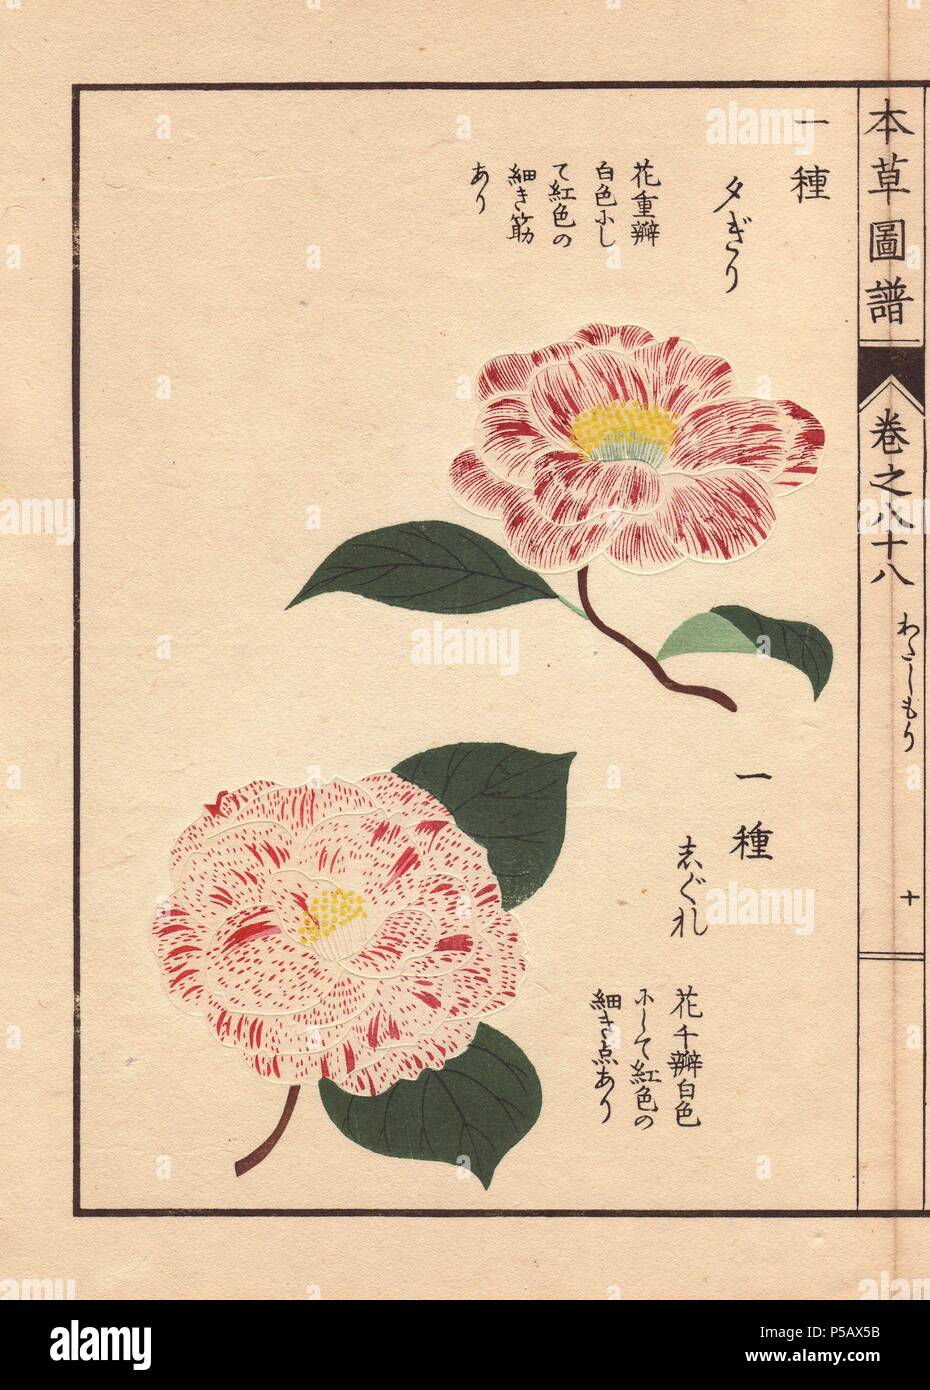 Pink and white camellias 'Yufugiri' and 'Shigure'. . Thea japonica Nois. flore semipleno forma. . Colour-printed woodblock engraving by Kan'en Iwasaki from 'Honzo Zufu,' an Illustrated Guide to Medicinal Plants, 1884. Iwasaki (1786-1842) was a Japanese botanist, entomologist and zoologist. He was one of the first Japanese botanists to incorporate western knowledge into his studies. Stock Photo